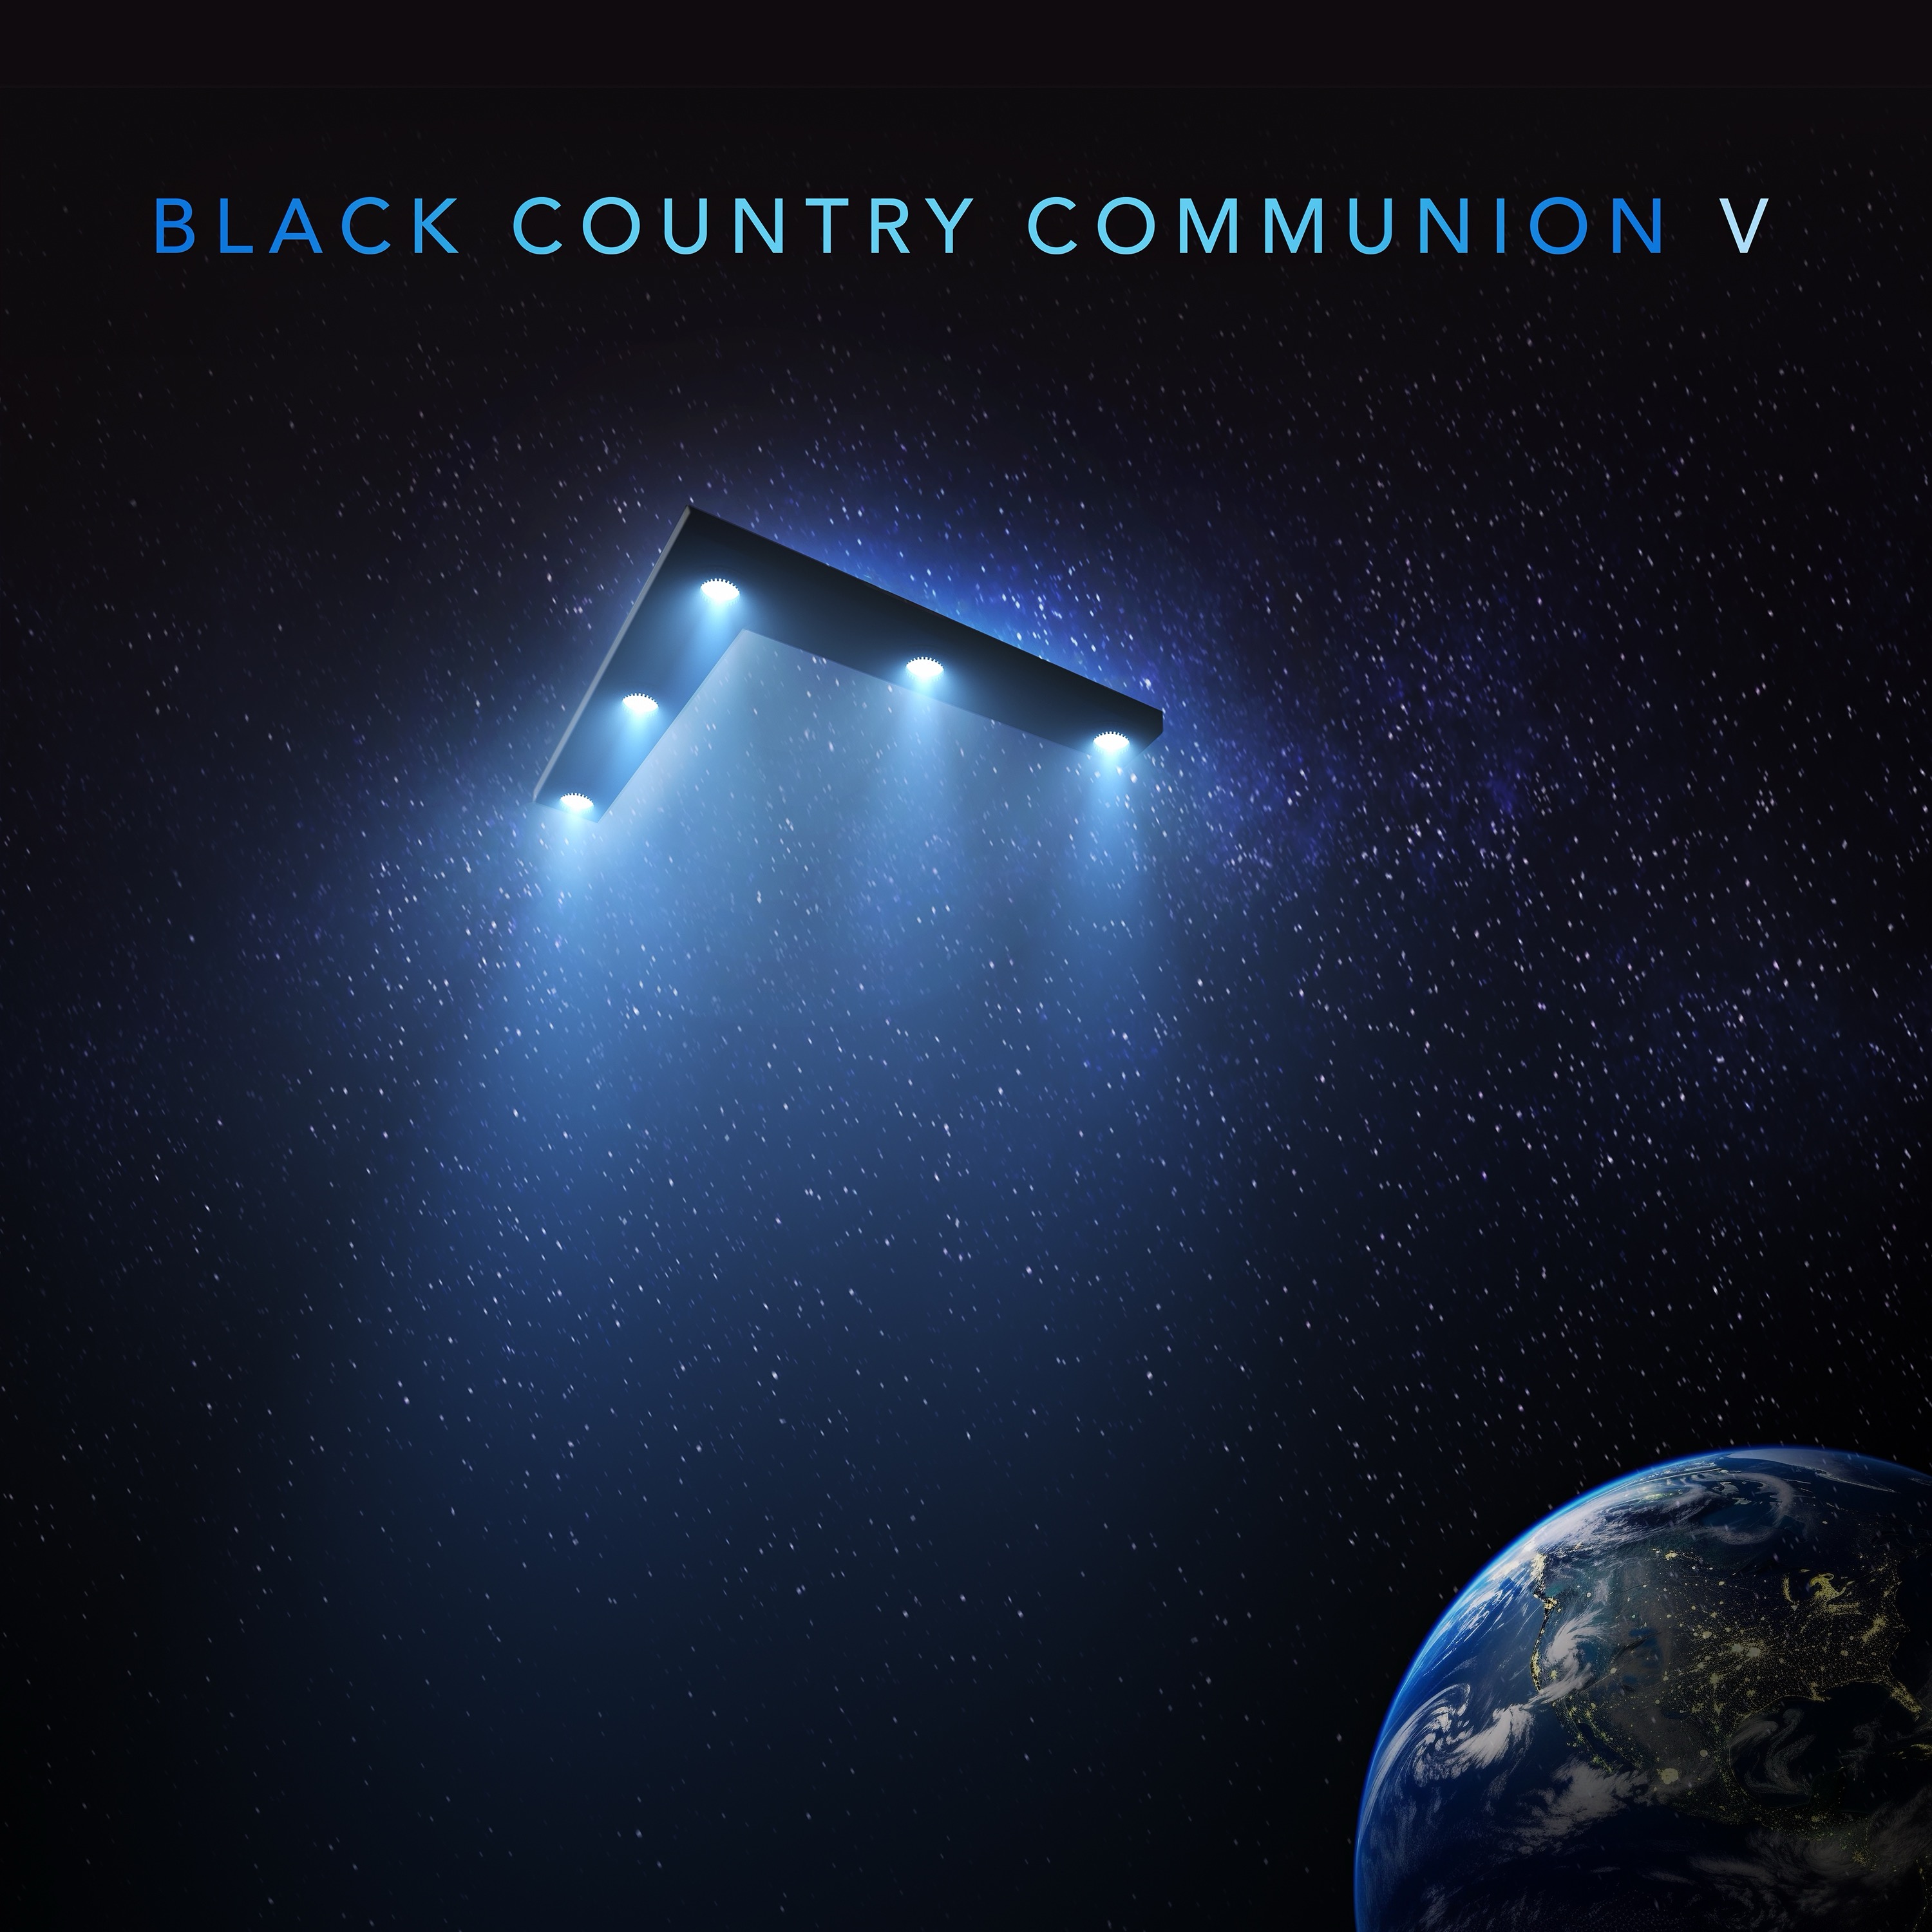 Black Country Communion Return With “V”